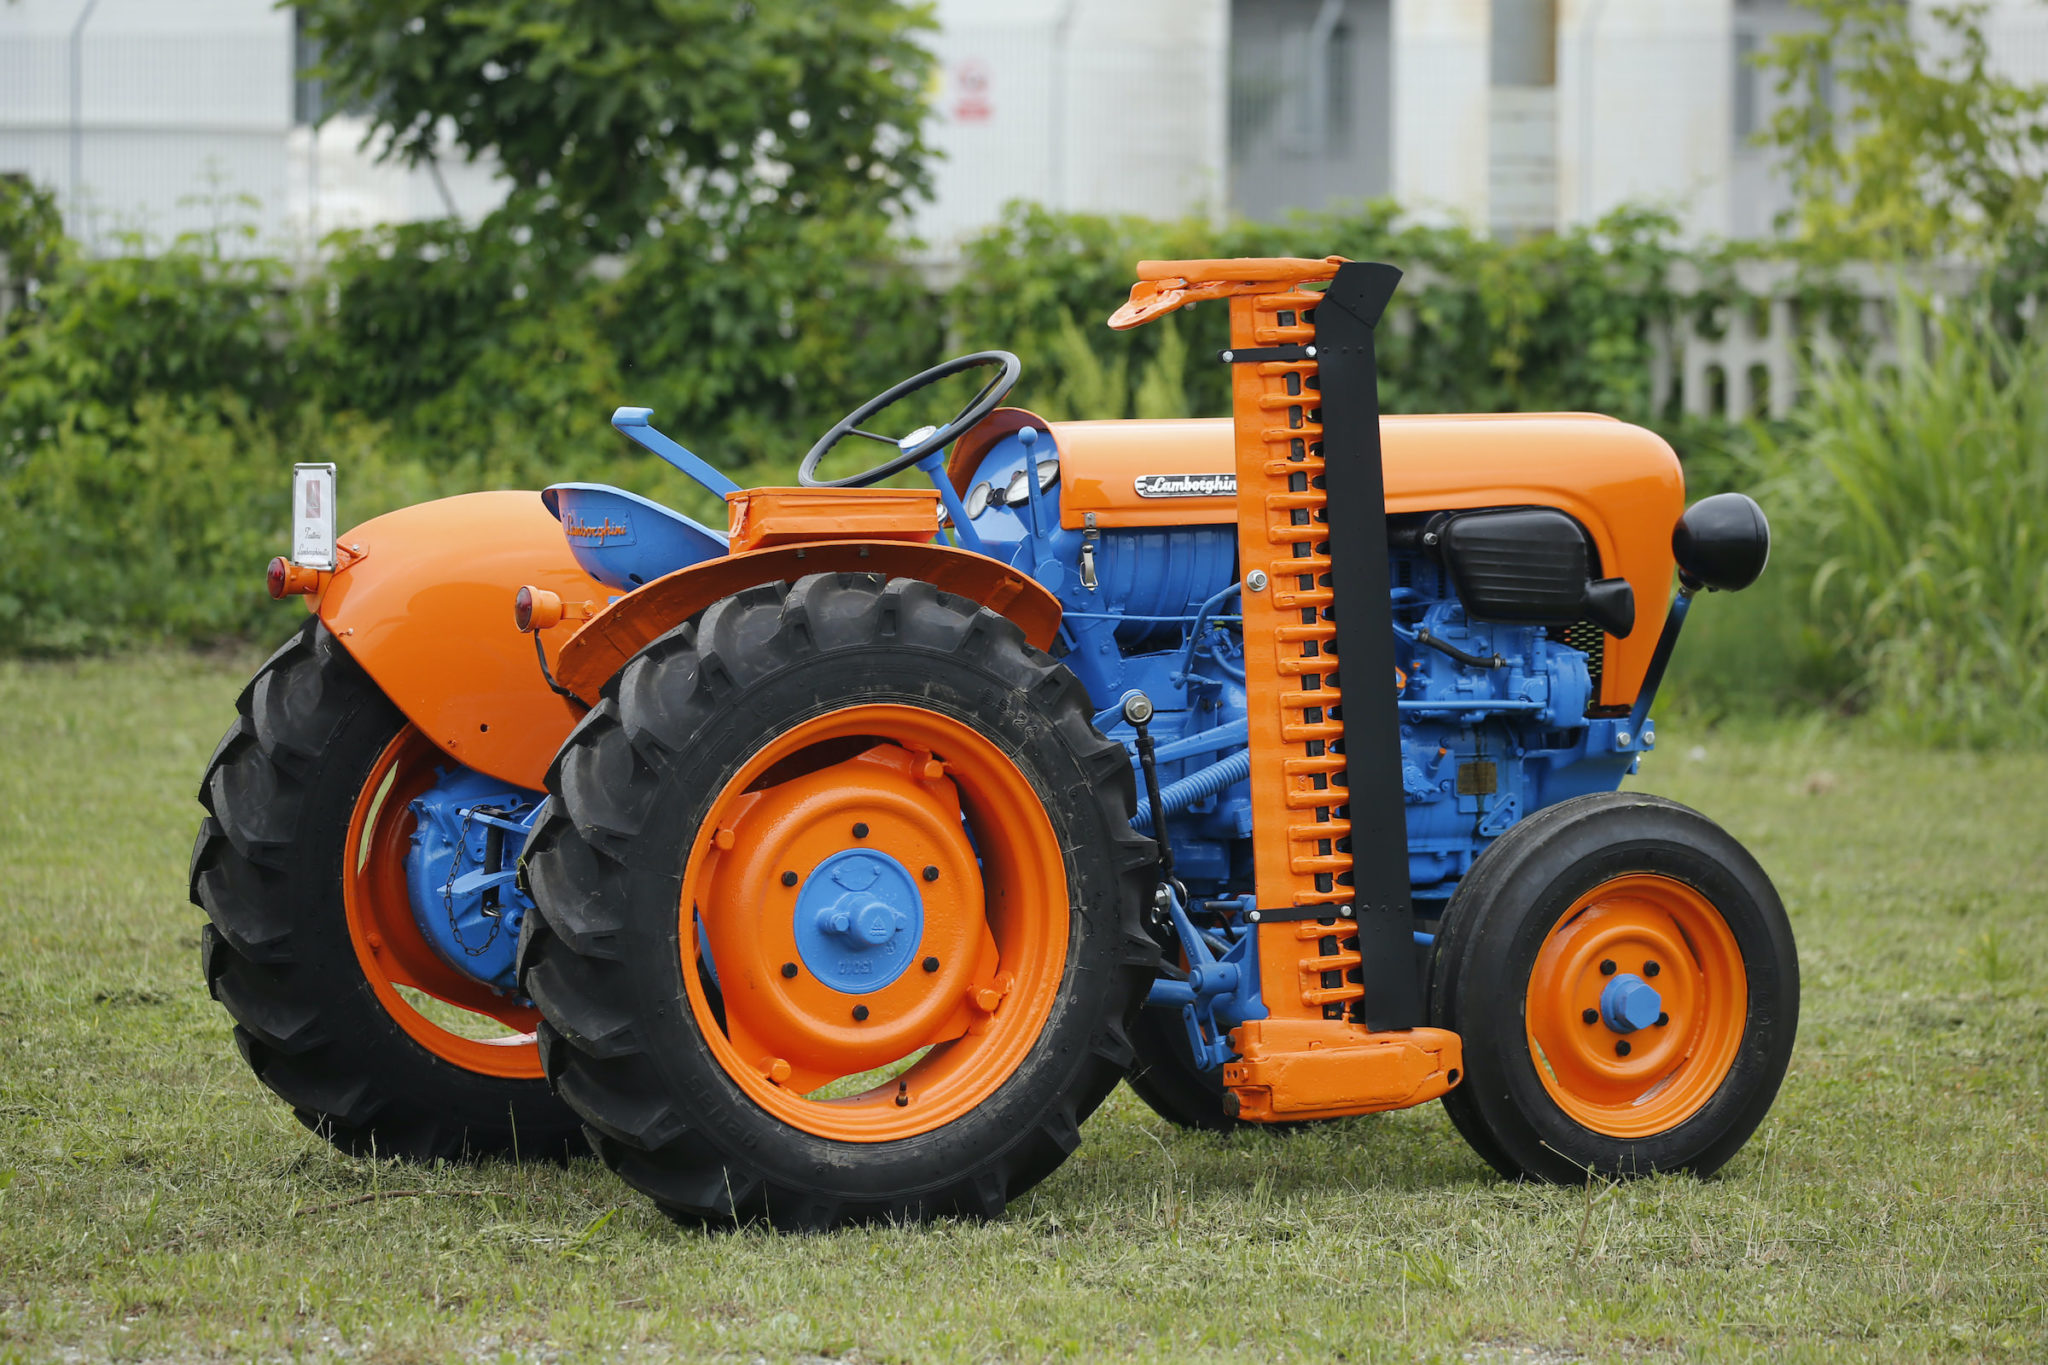 The 2241R Tractor A Wearing Gulf Colors For